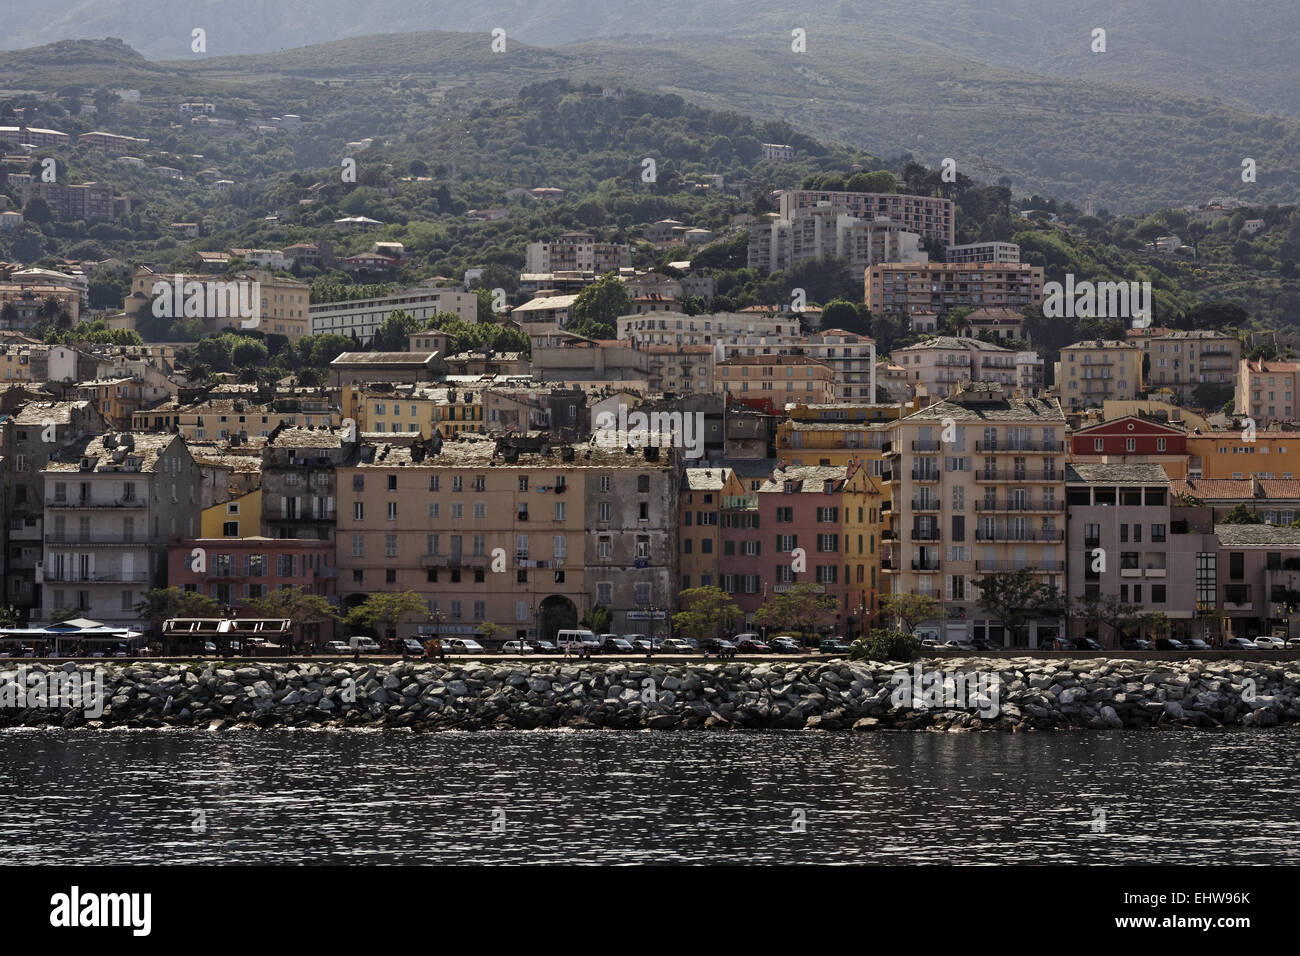 Bastia, view from the ferry, Corsica, France Stock Photo